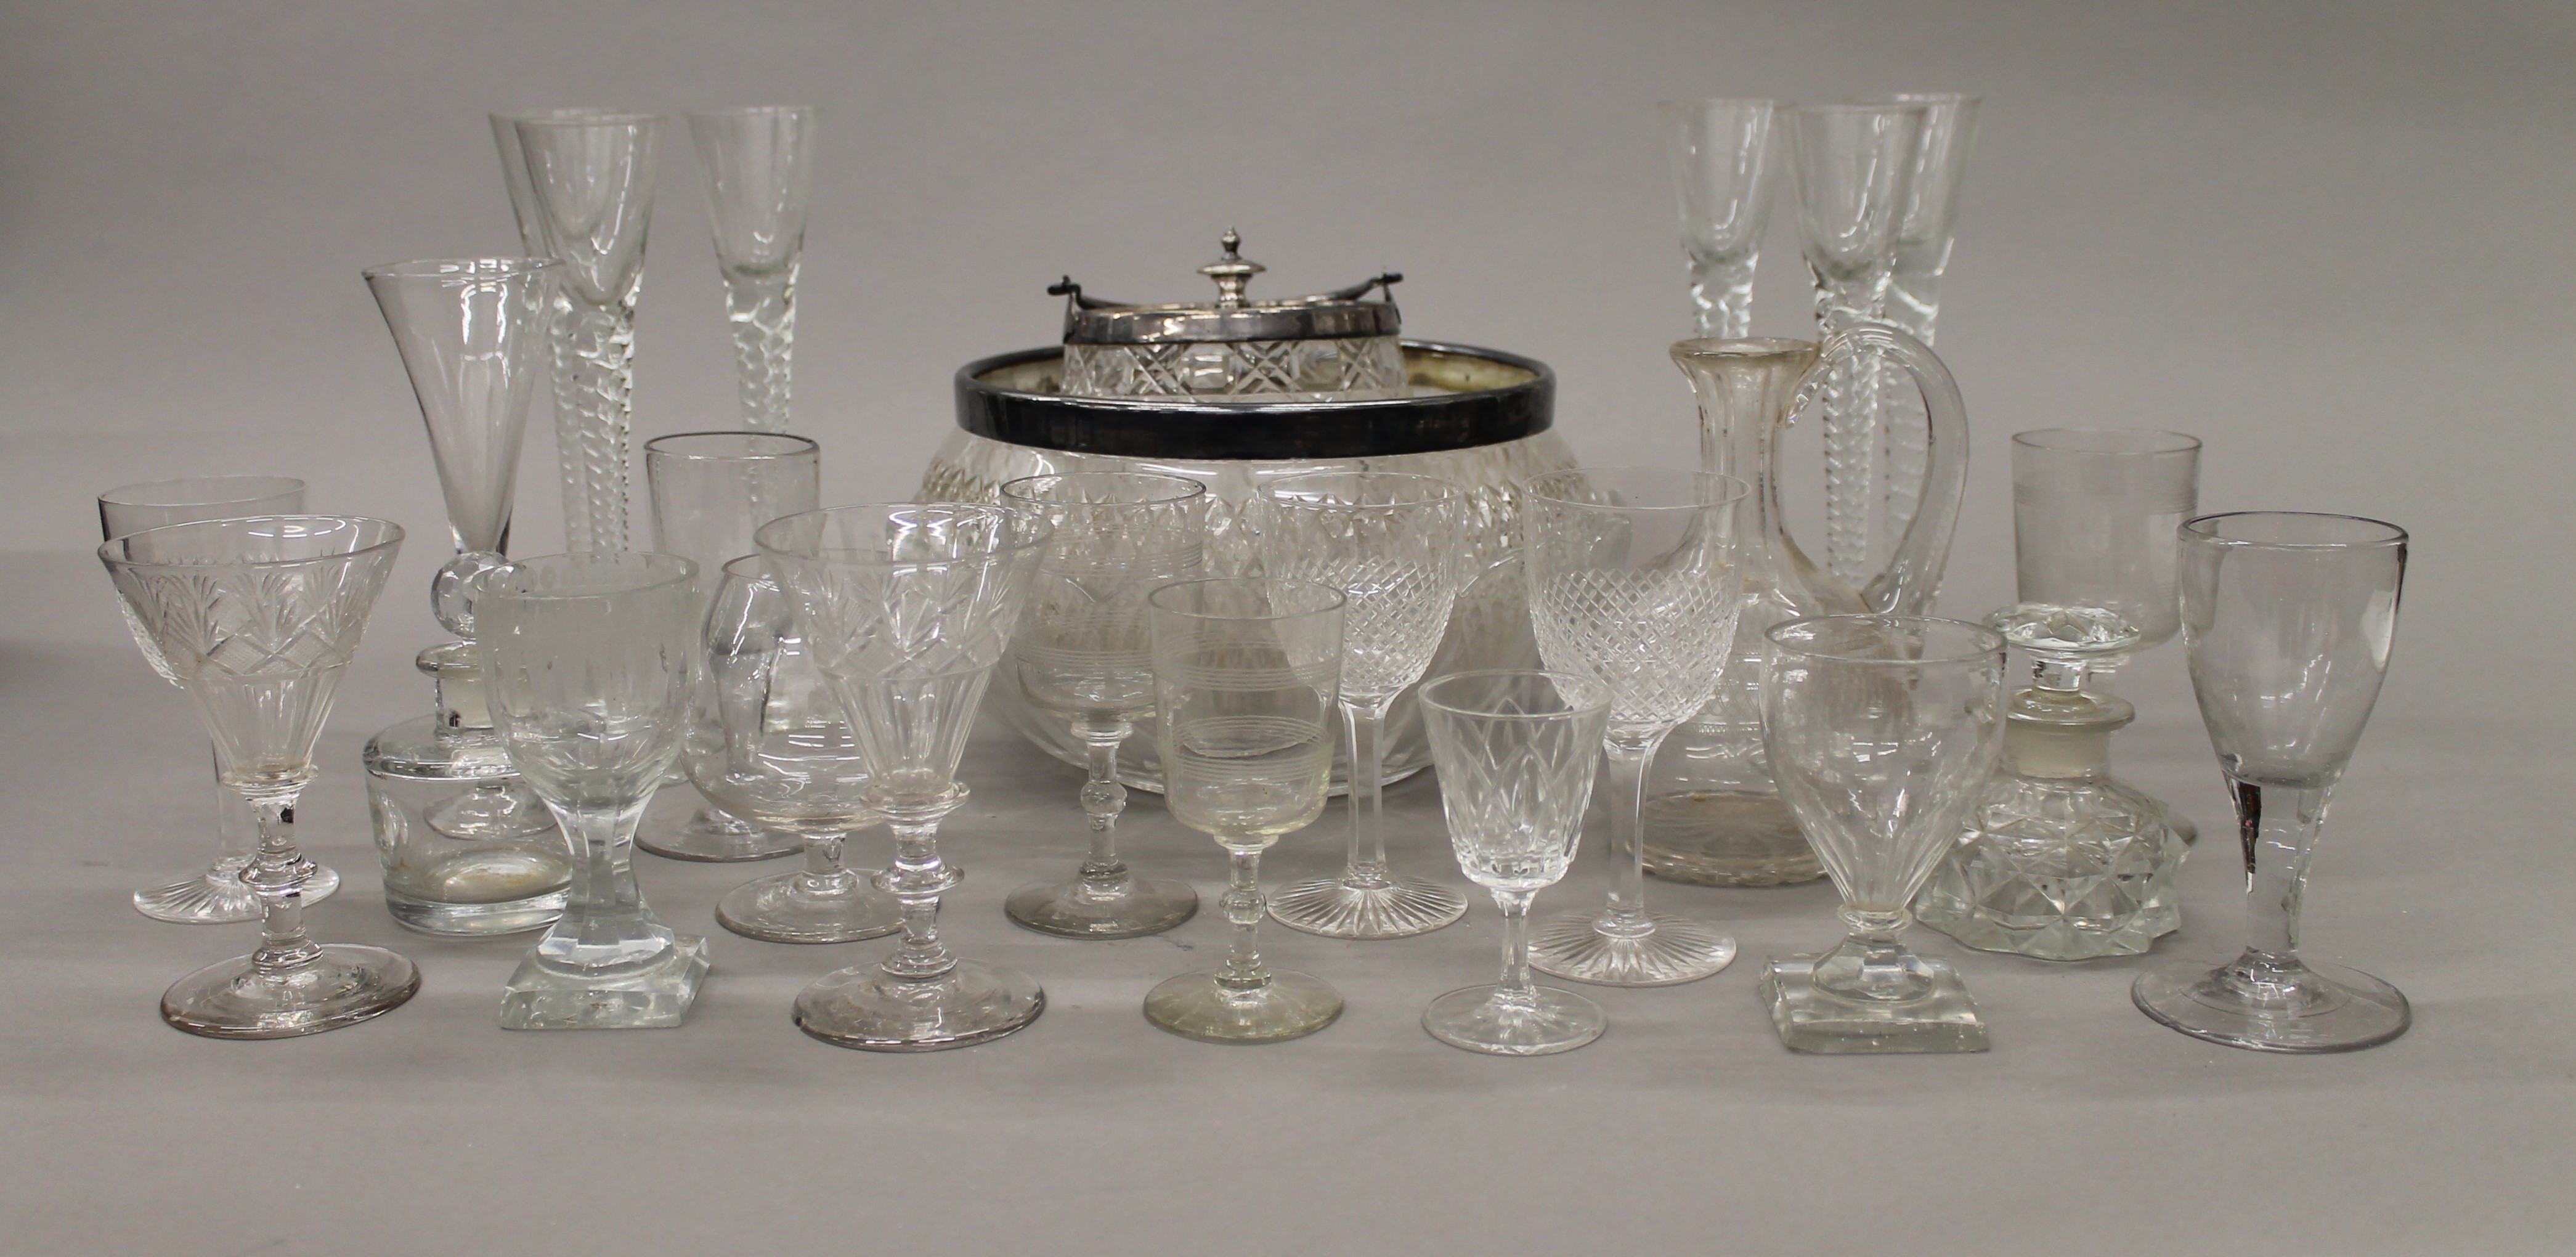 A box of various glassware.